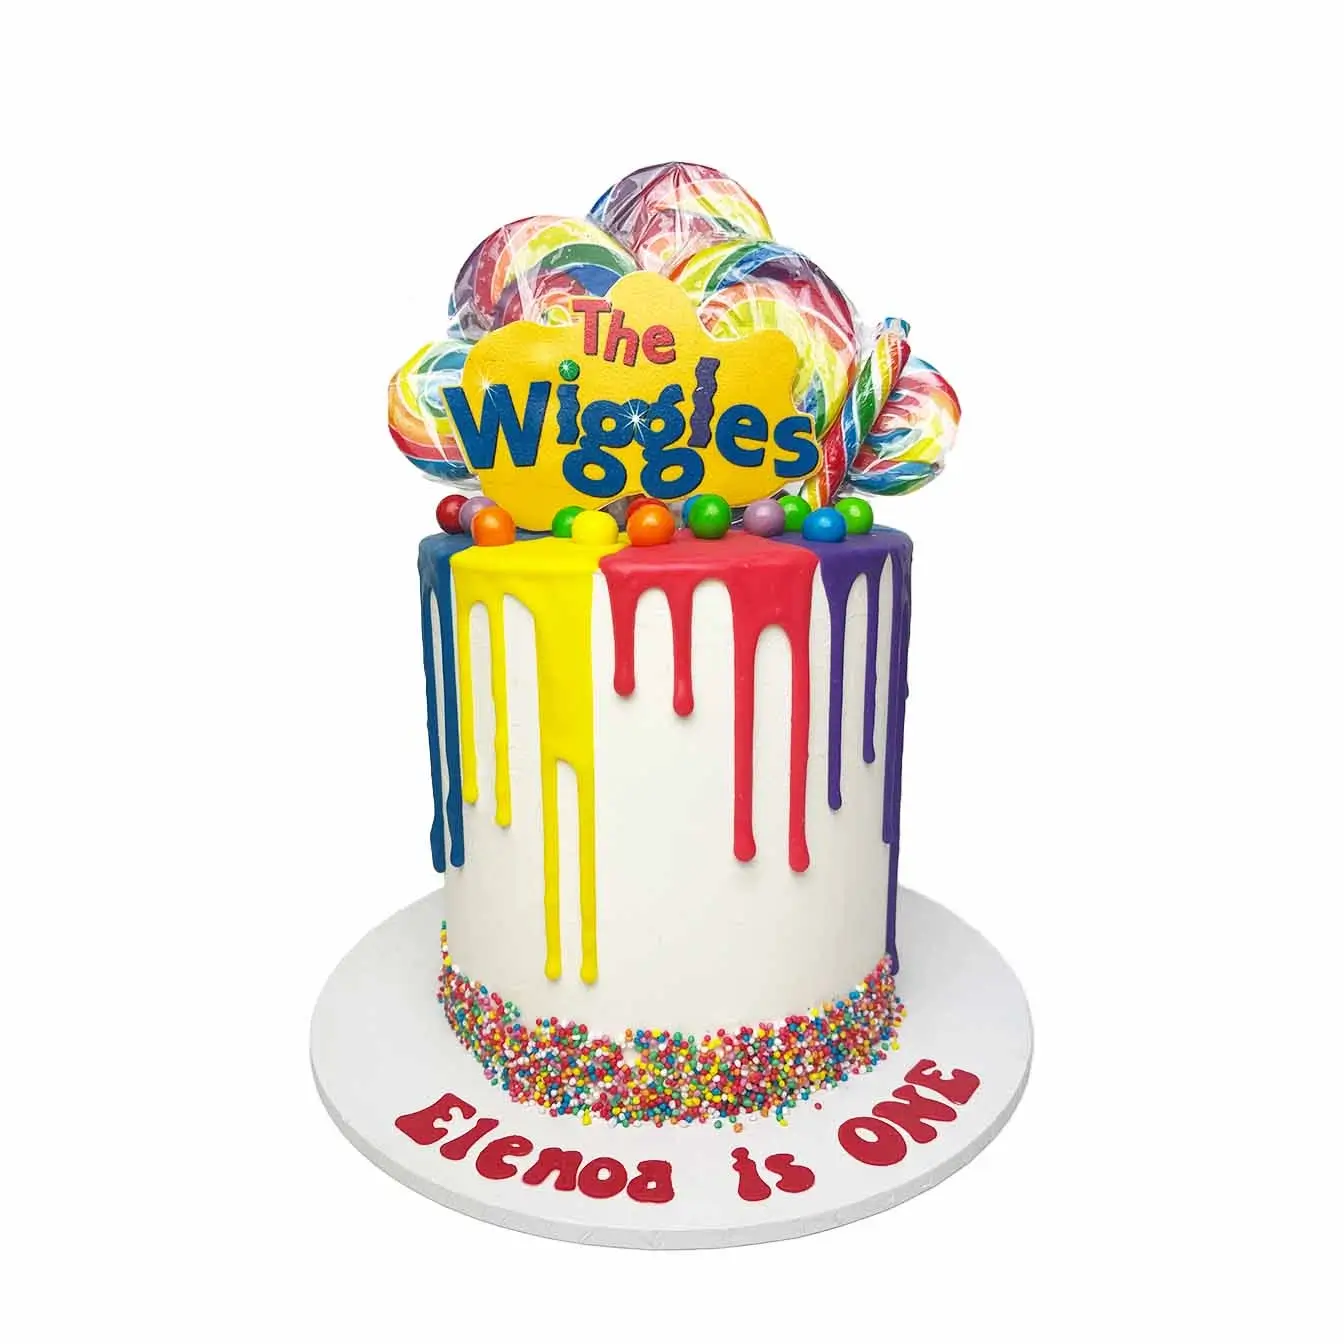 Wiggly Drip Delight Cake - A white base cake with colorful drips, rainbow sprinkles, Wiggles logo, rainbow lollipops, and lollies, a whimsical centerpiece for Wiggles-themed celebrations.